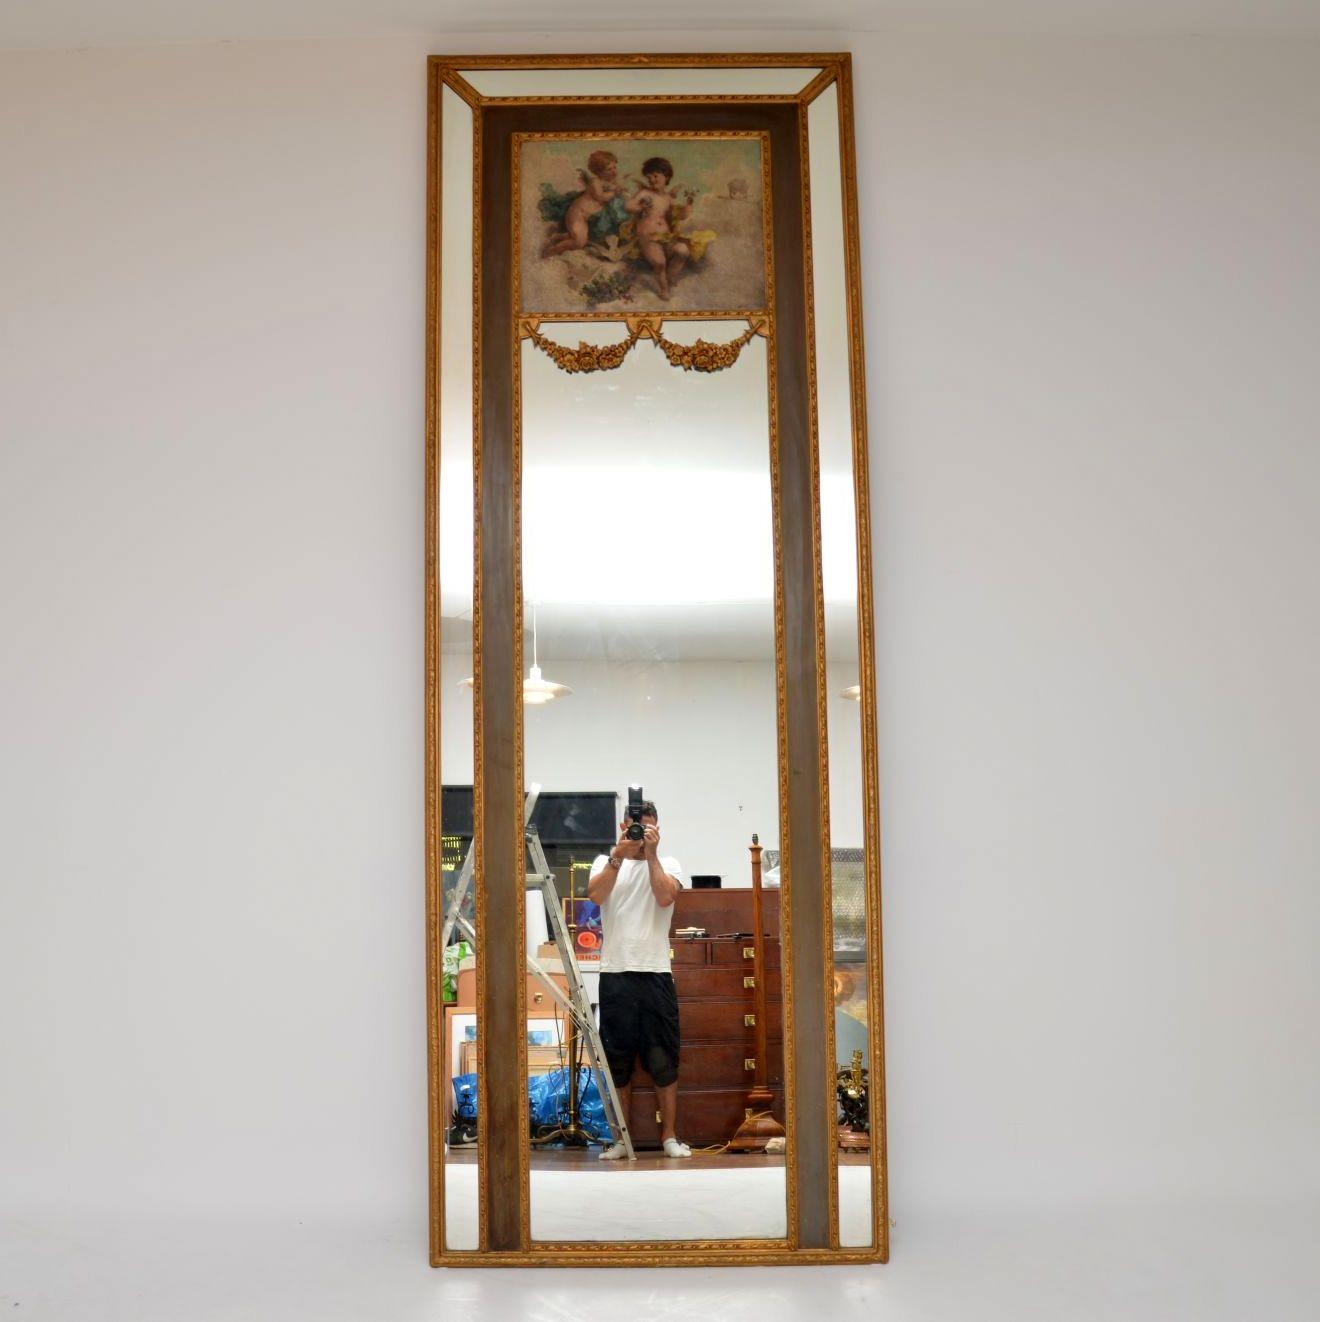 Very high and very decorative antique giltwood mirror with some wonderful features, including a magnificent signed painting.

It’s very hard to show a good image of this mirror and to convey the large proportions. It looks far better in real life.